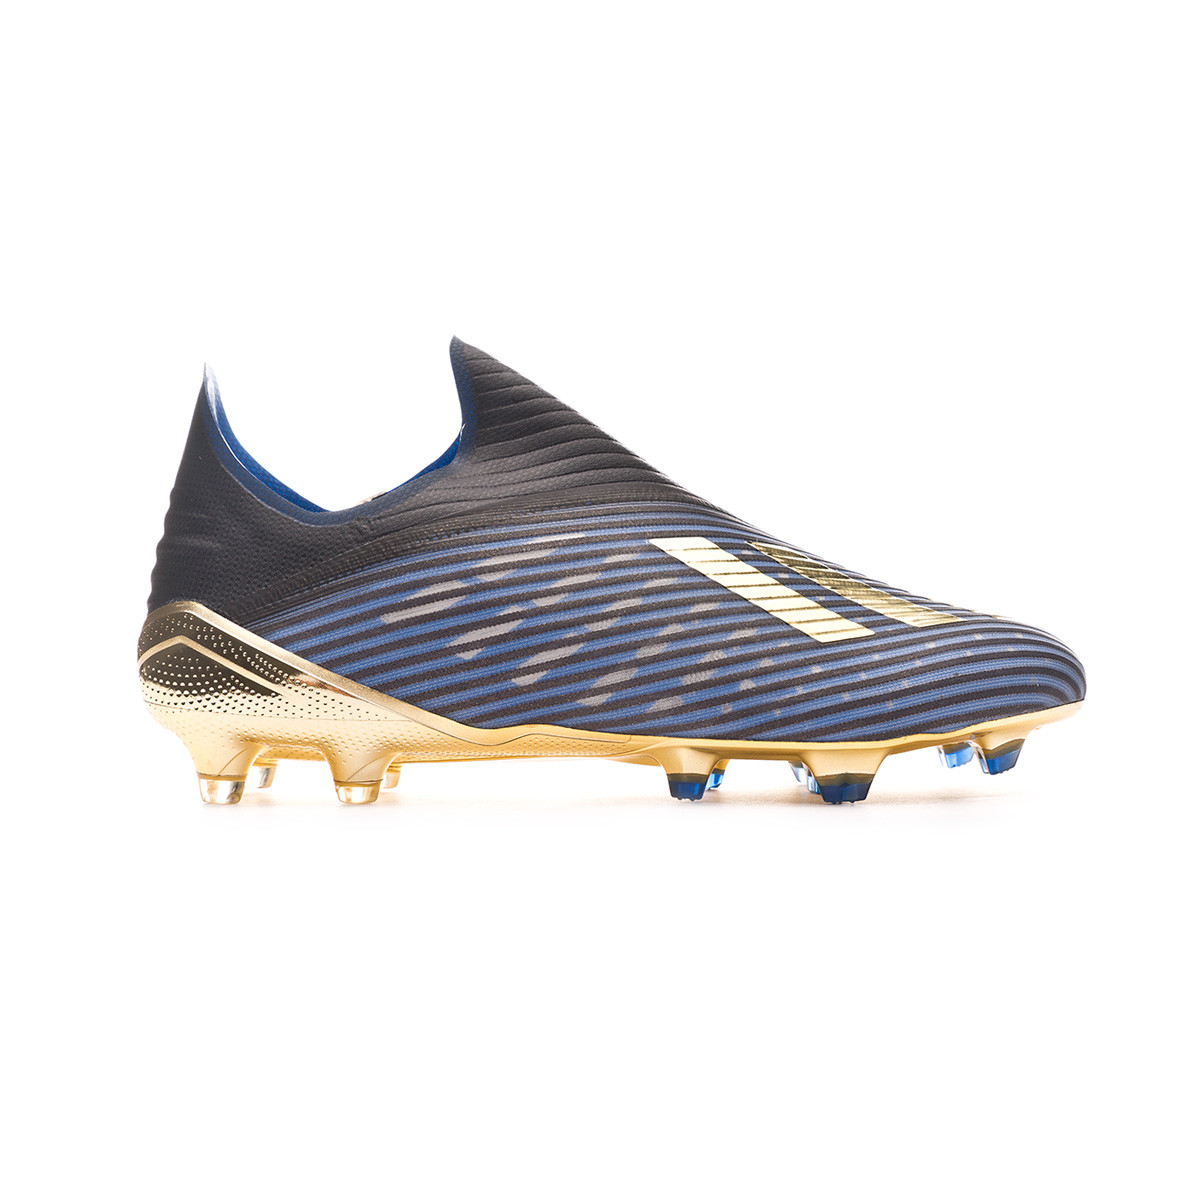 adidas x 19 black and gold